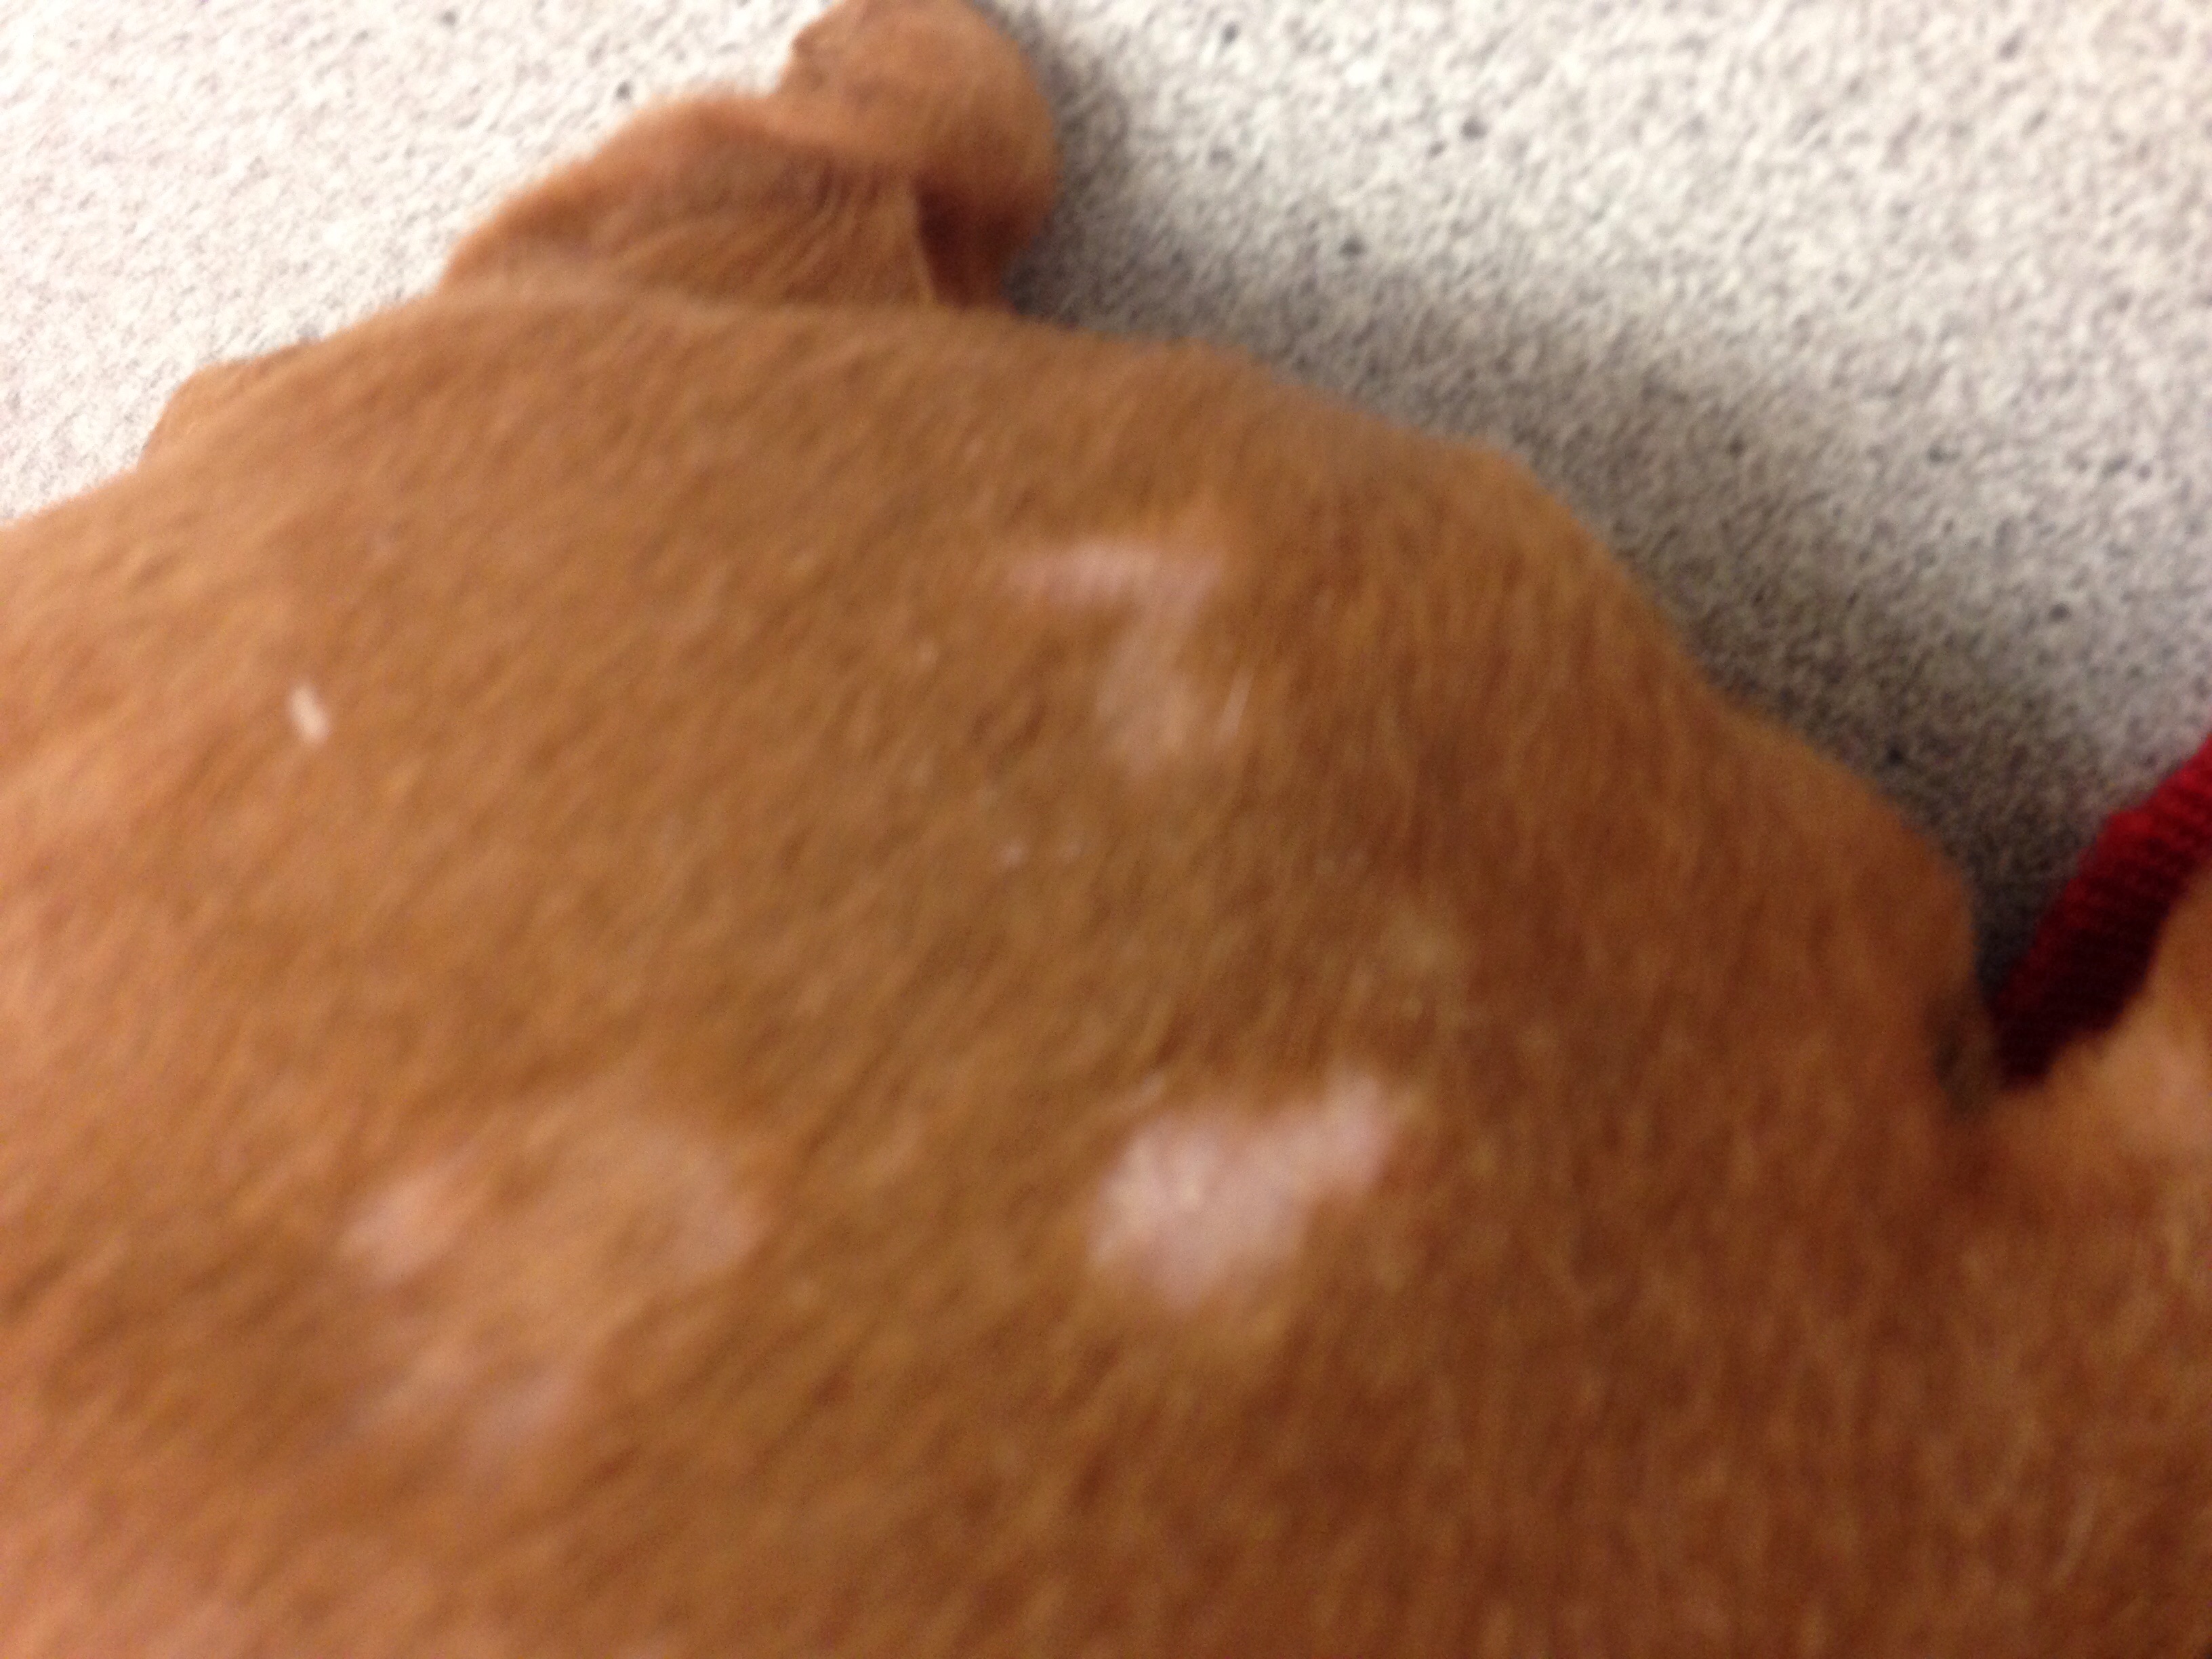 Light Brown Scaly Spots On Skin